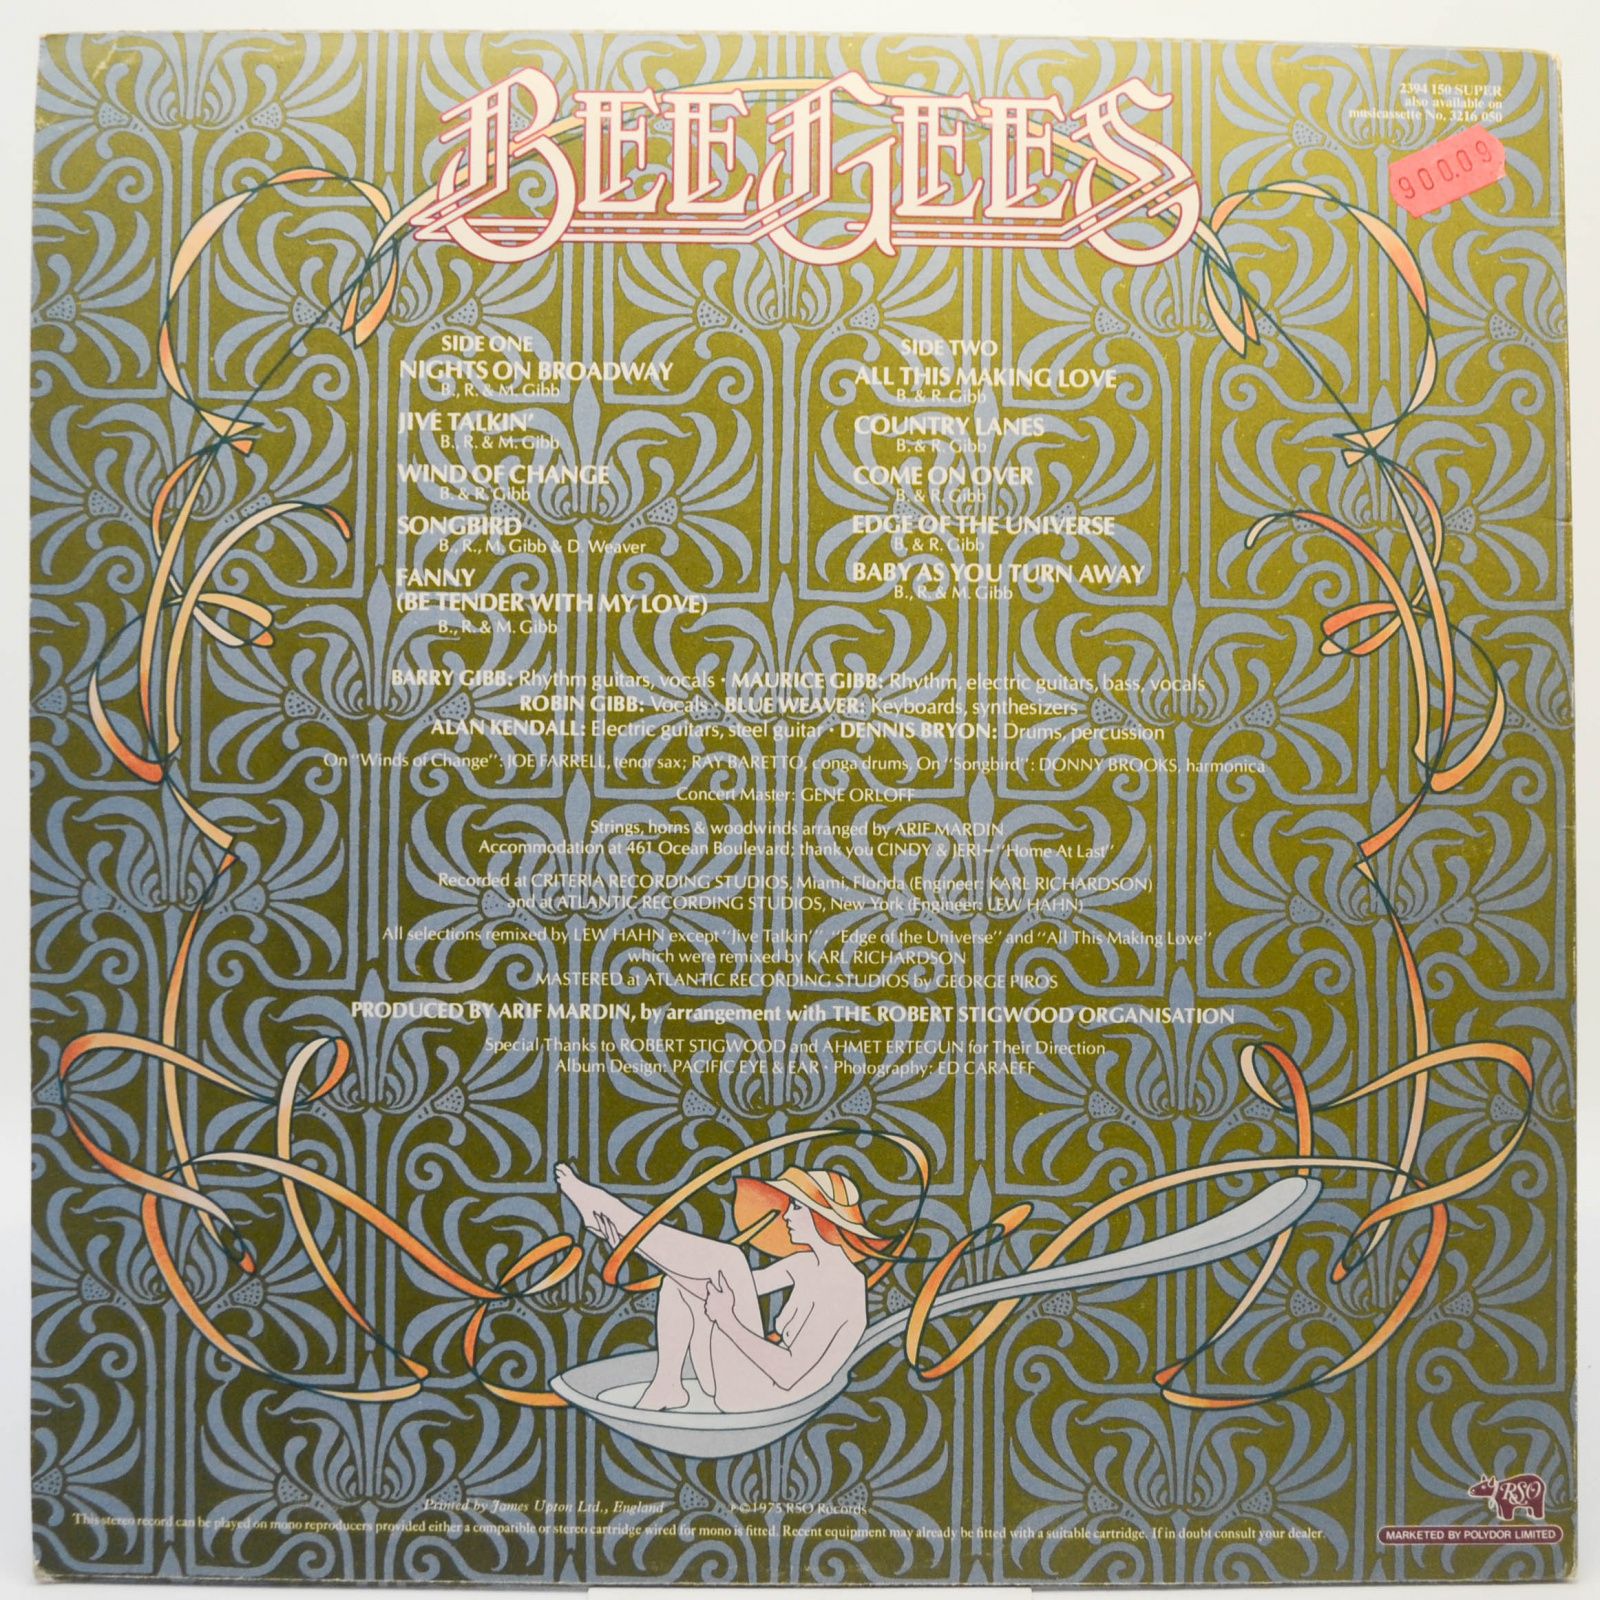 Bee Gees — Main Course, 1975